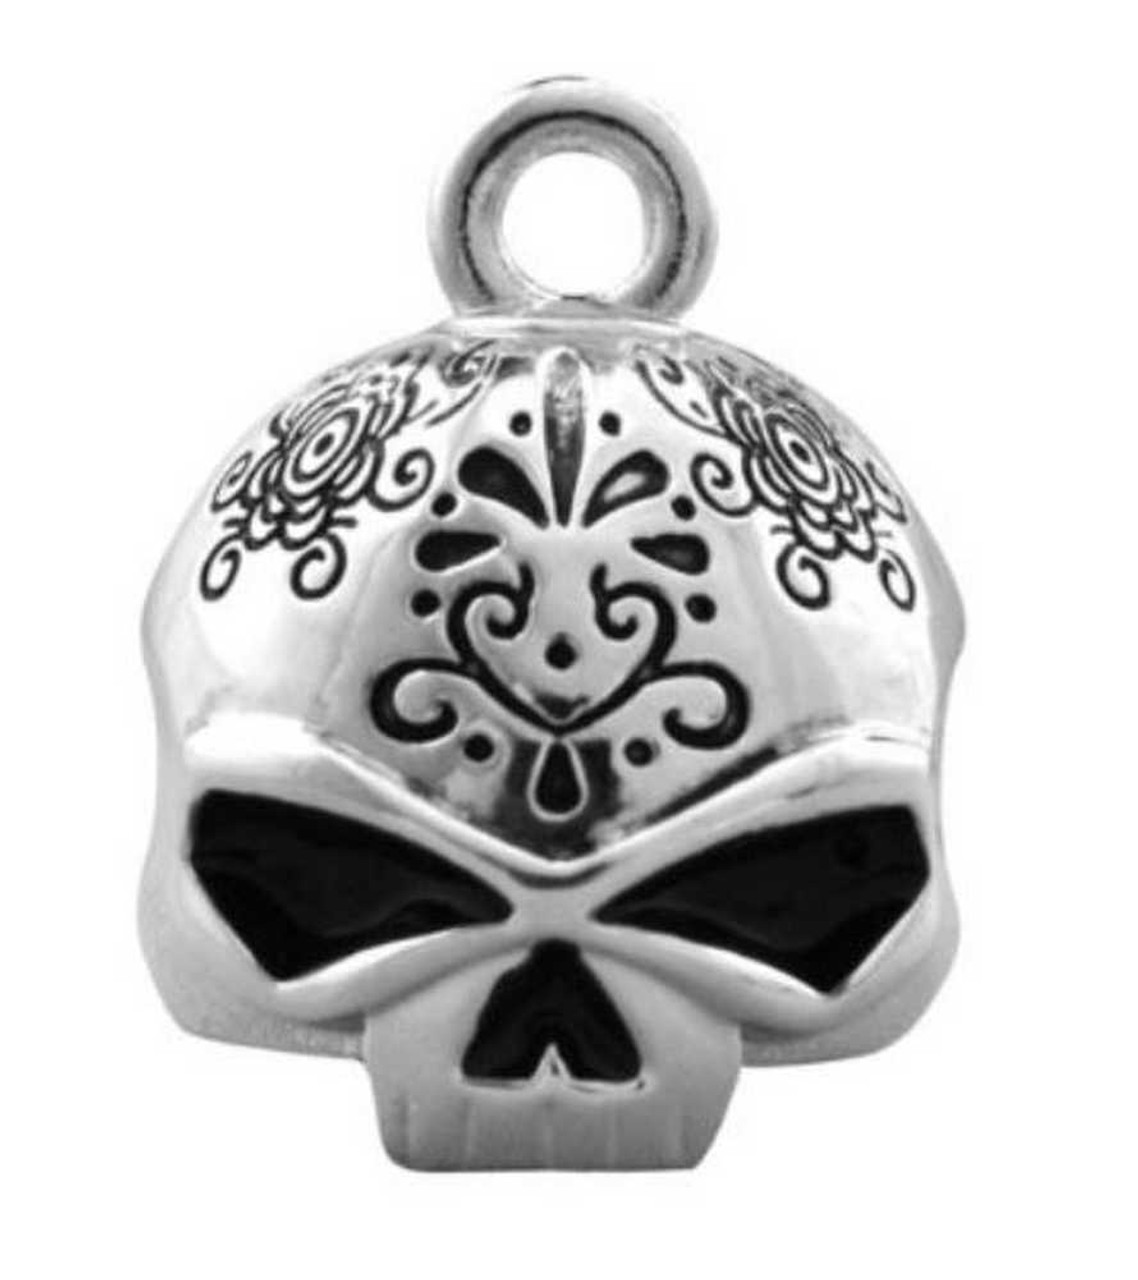 HARLEY DAVIDSON DAY OF THE DEAD RIDE BELL